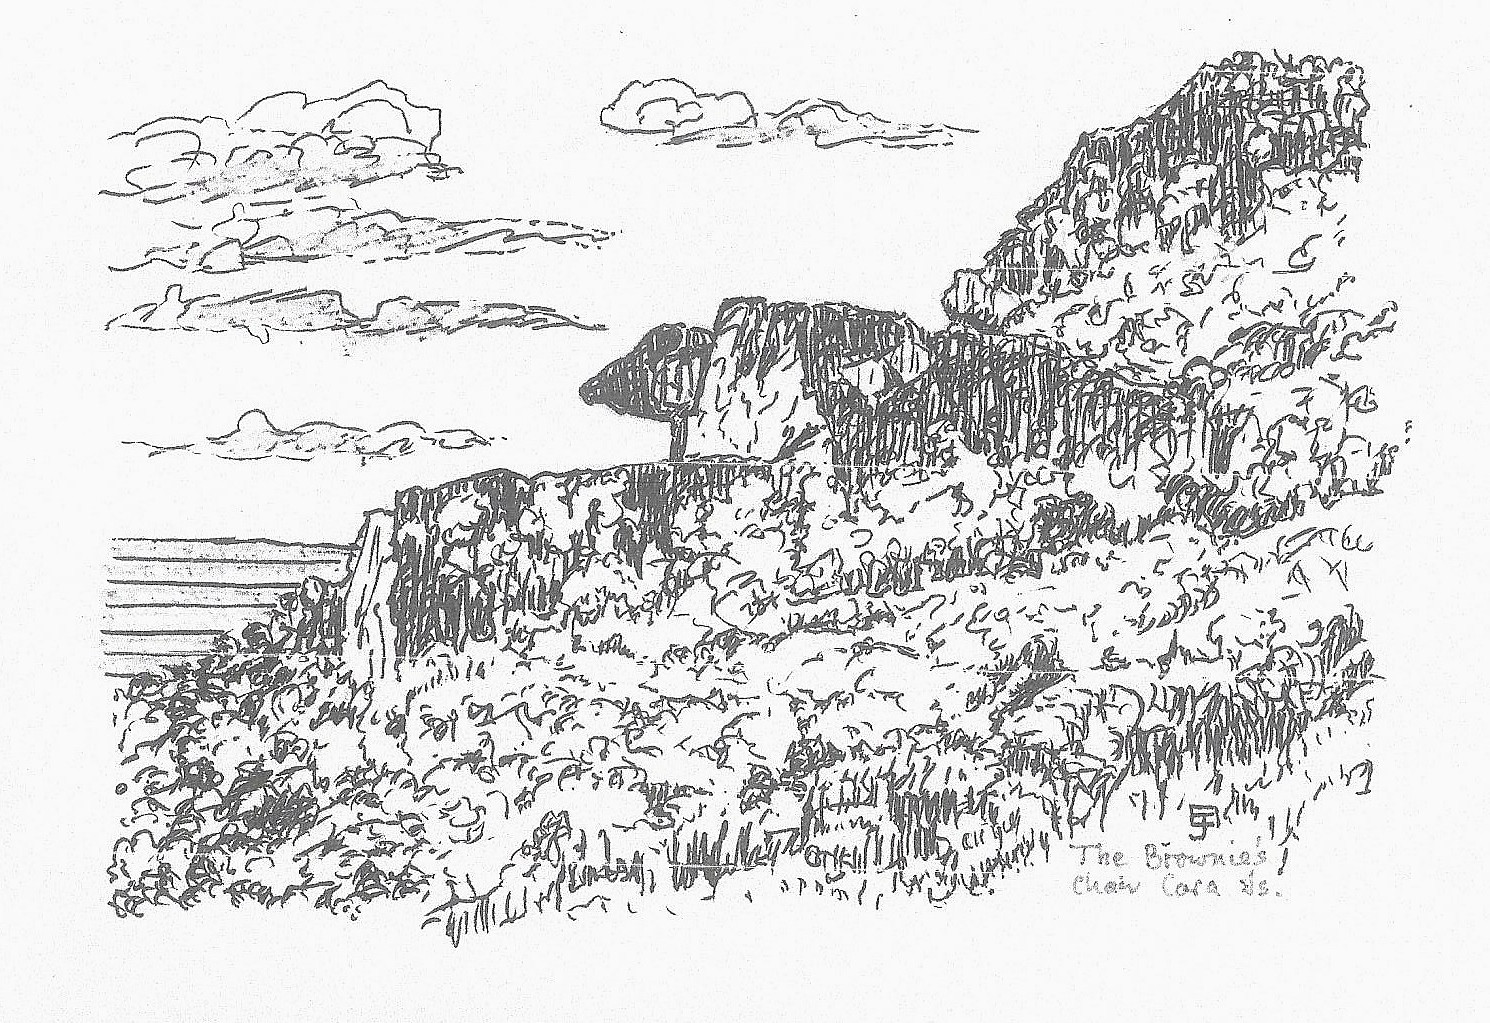 A black and white sketch of the Brownie's chair, a rocky landscape on the Isle of Cara